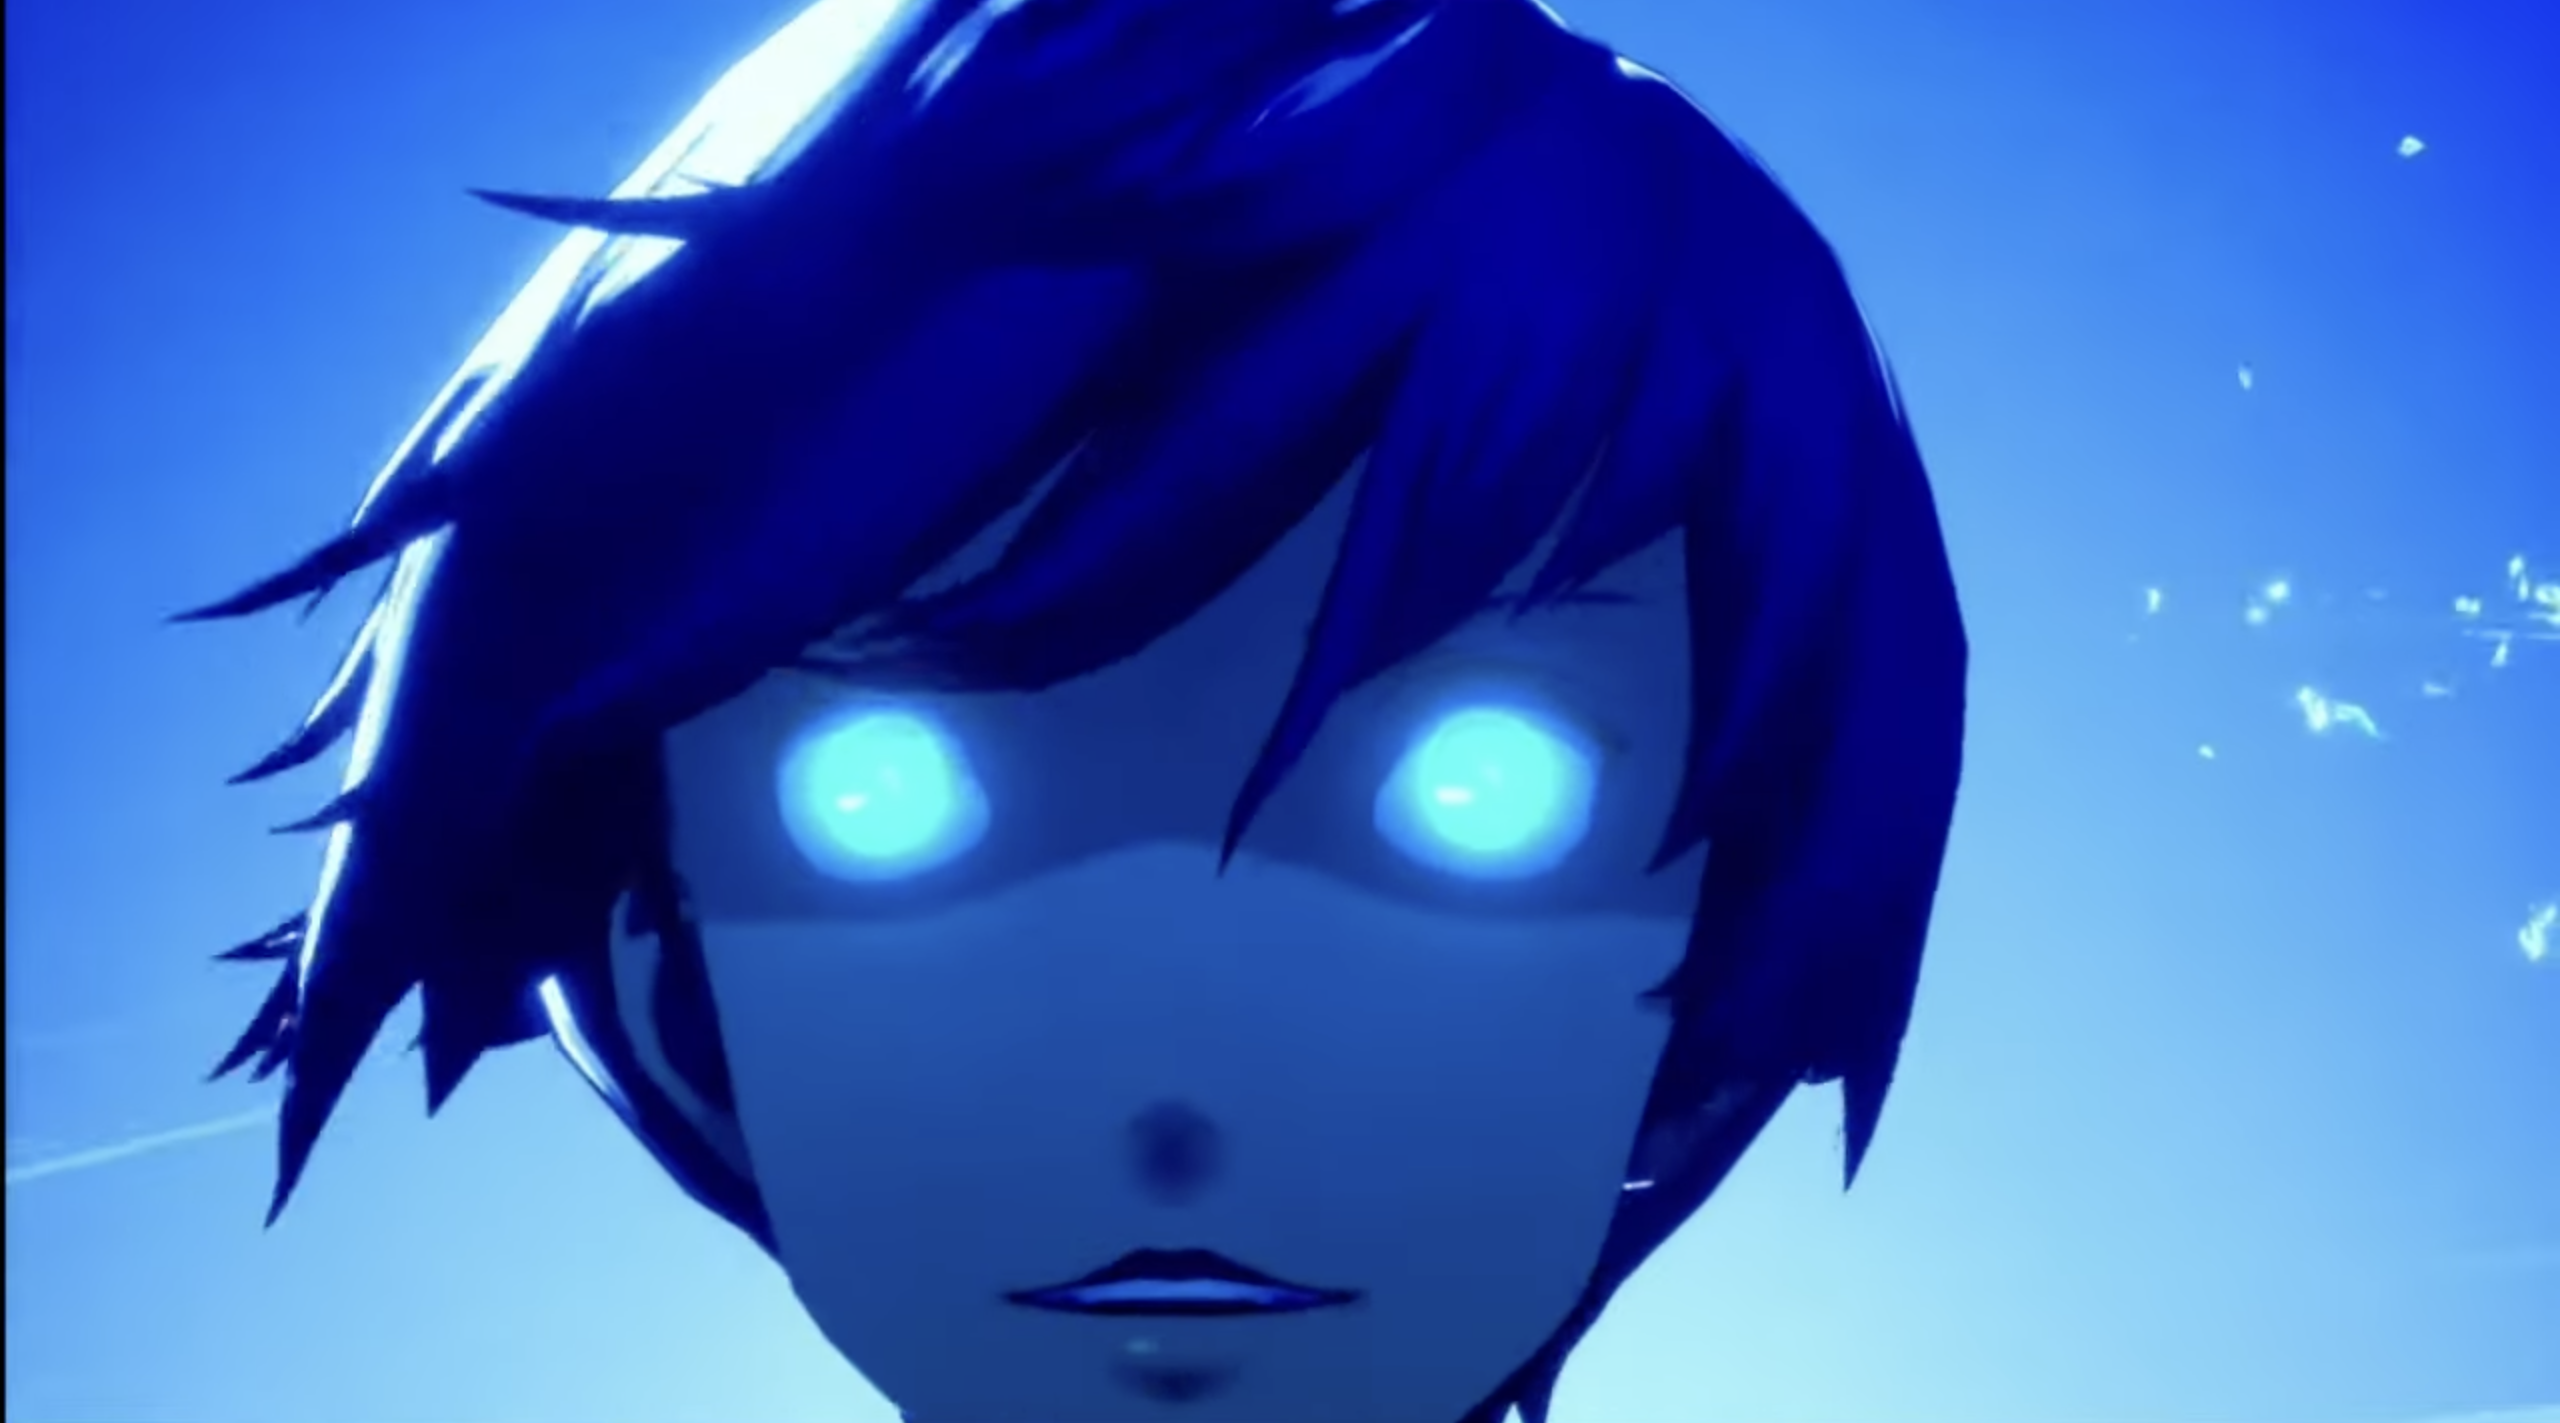 Persona 3 Reload: Release date, platforms, trailers, gameplay & more